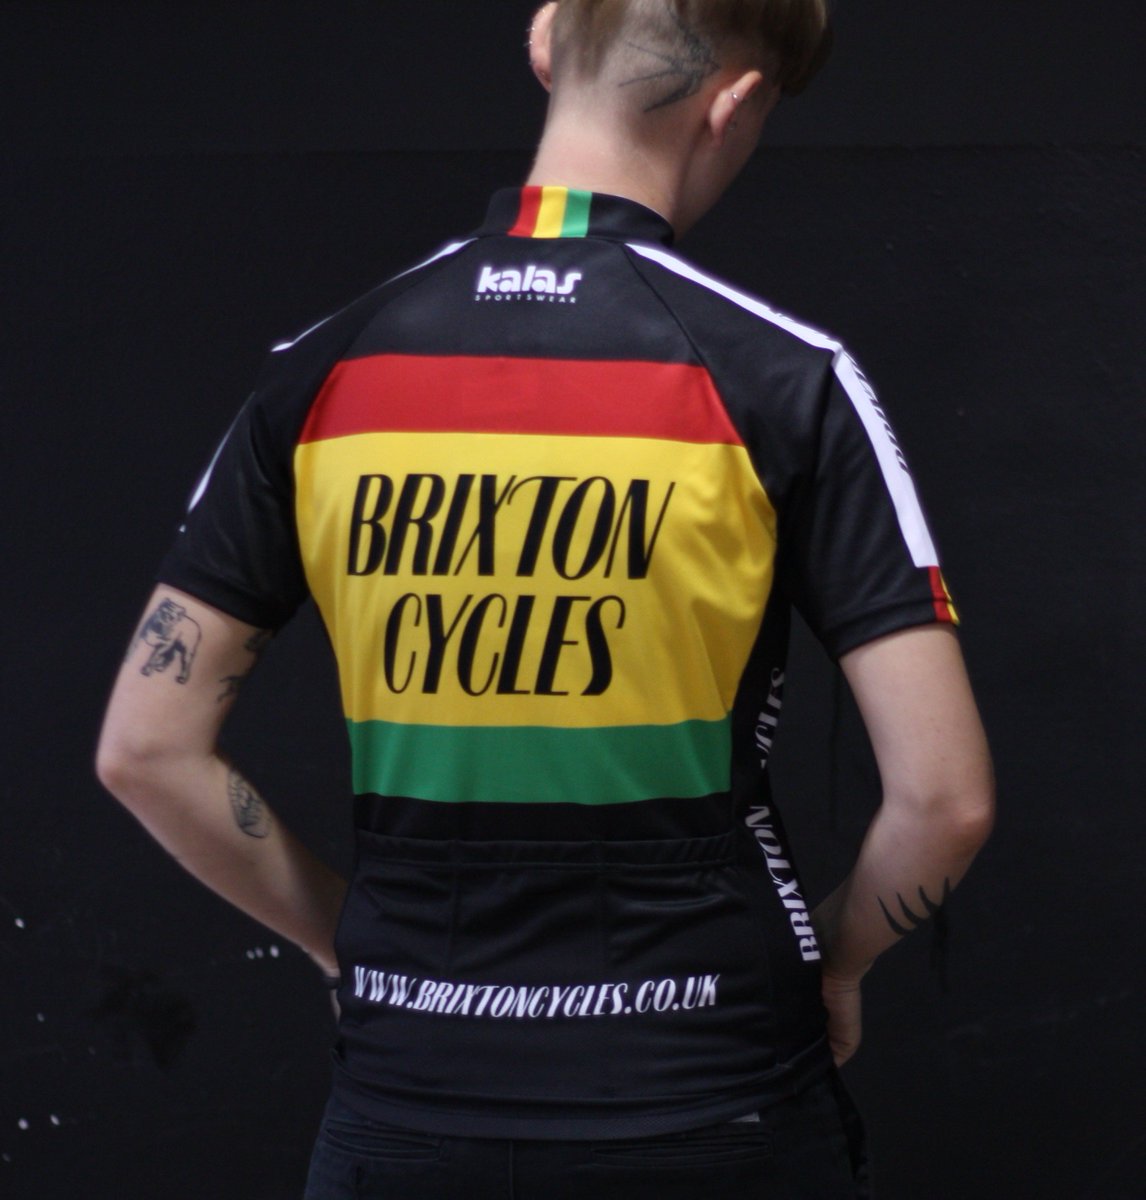 activering astronaut Aziatisch Brixton Cycles Workers' Co-op on Twitter: "Don't foget, you can now grab  one of our jerseys online. We ship worldwide too! https://t.co/K02KzCfgtP  https://t.co/9NvQzDoRoV" / Twitter